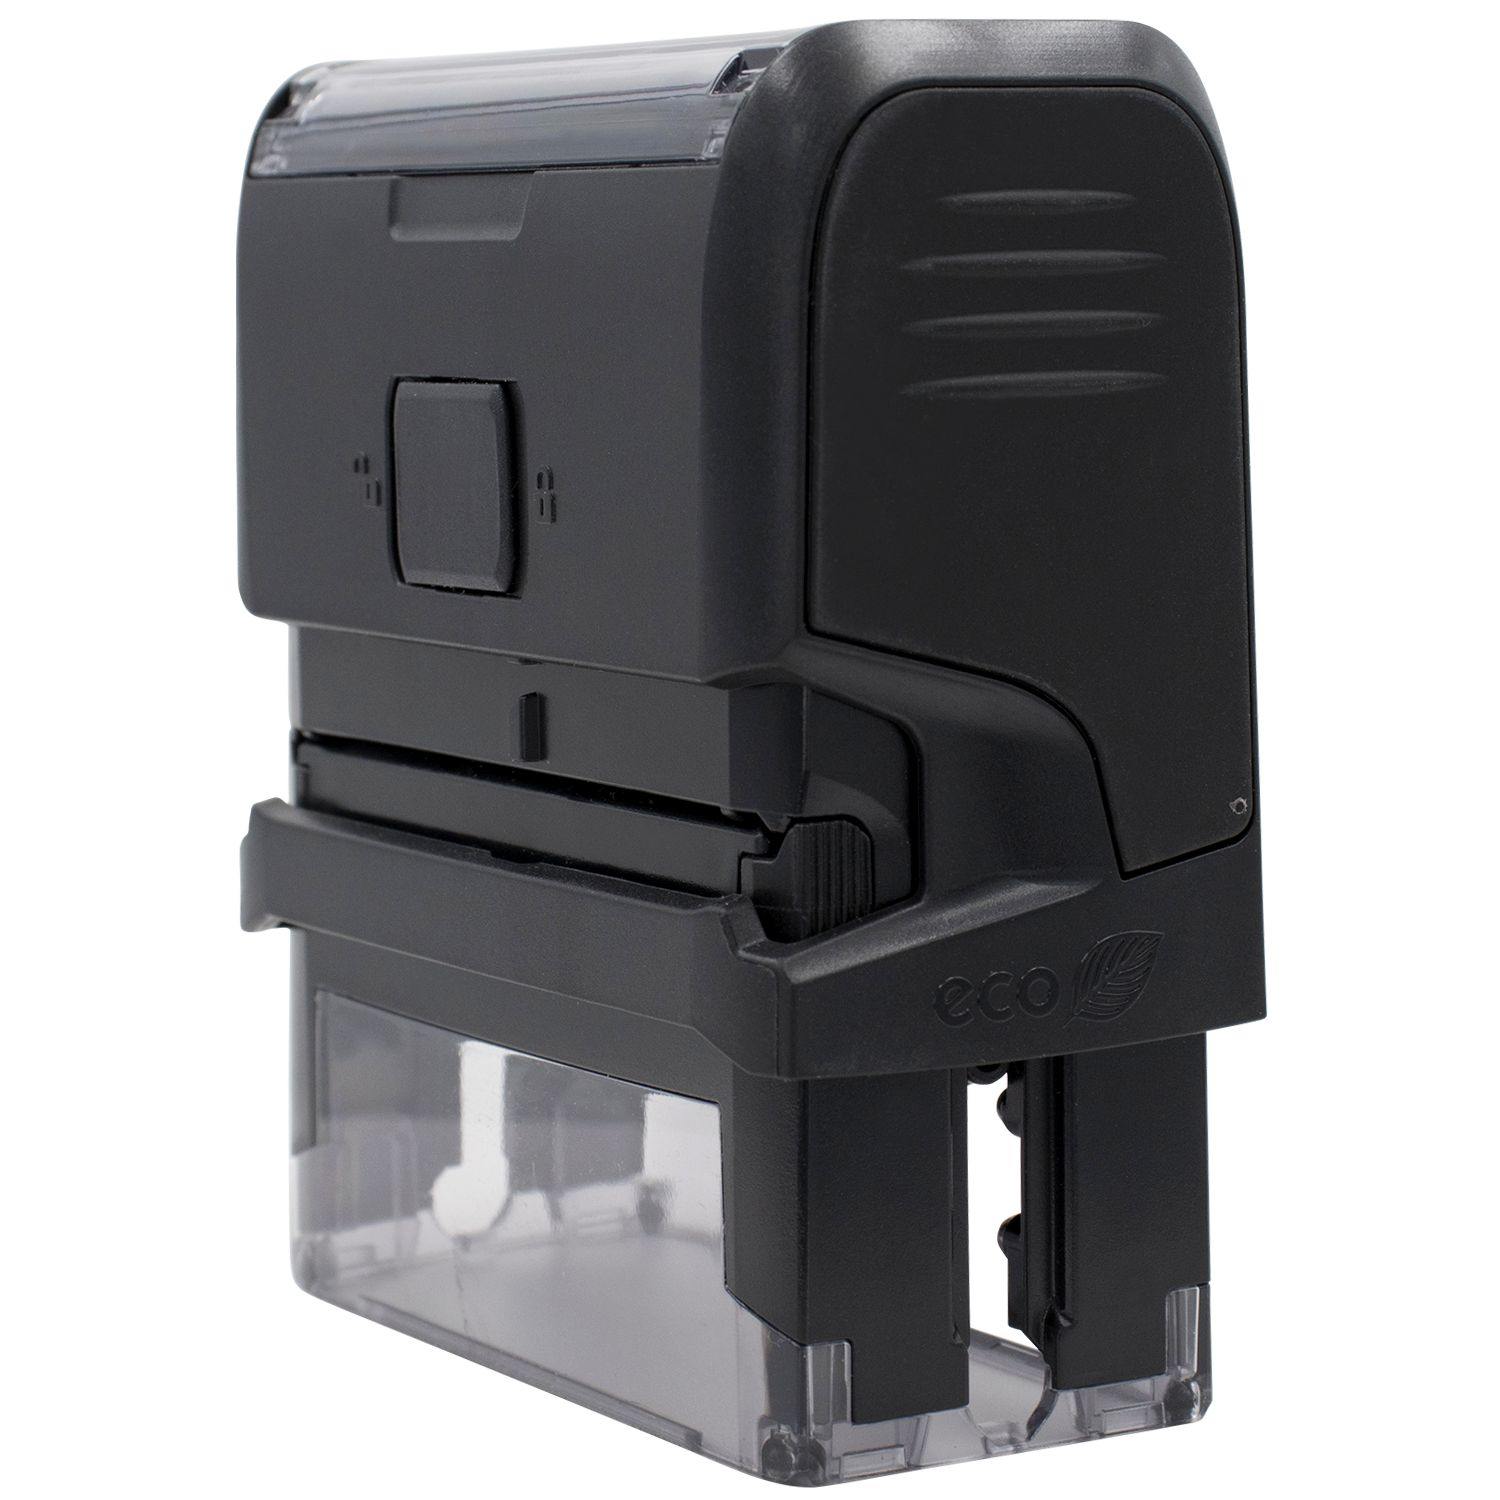 Large Self Inking Copy Stamp - Engineer Seal Stamps - Brand_Trodat, Impression Size_Large, Stamp Type_Self-Inking Stamp, Type of Use_Office, Type of Use_Professional